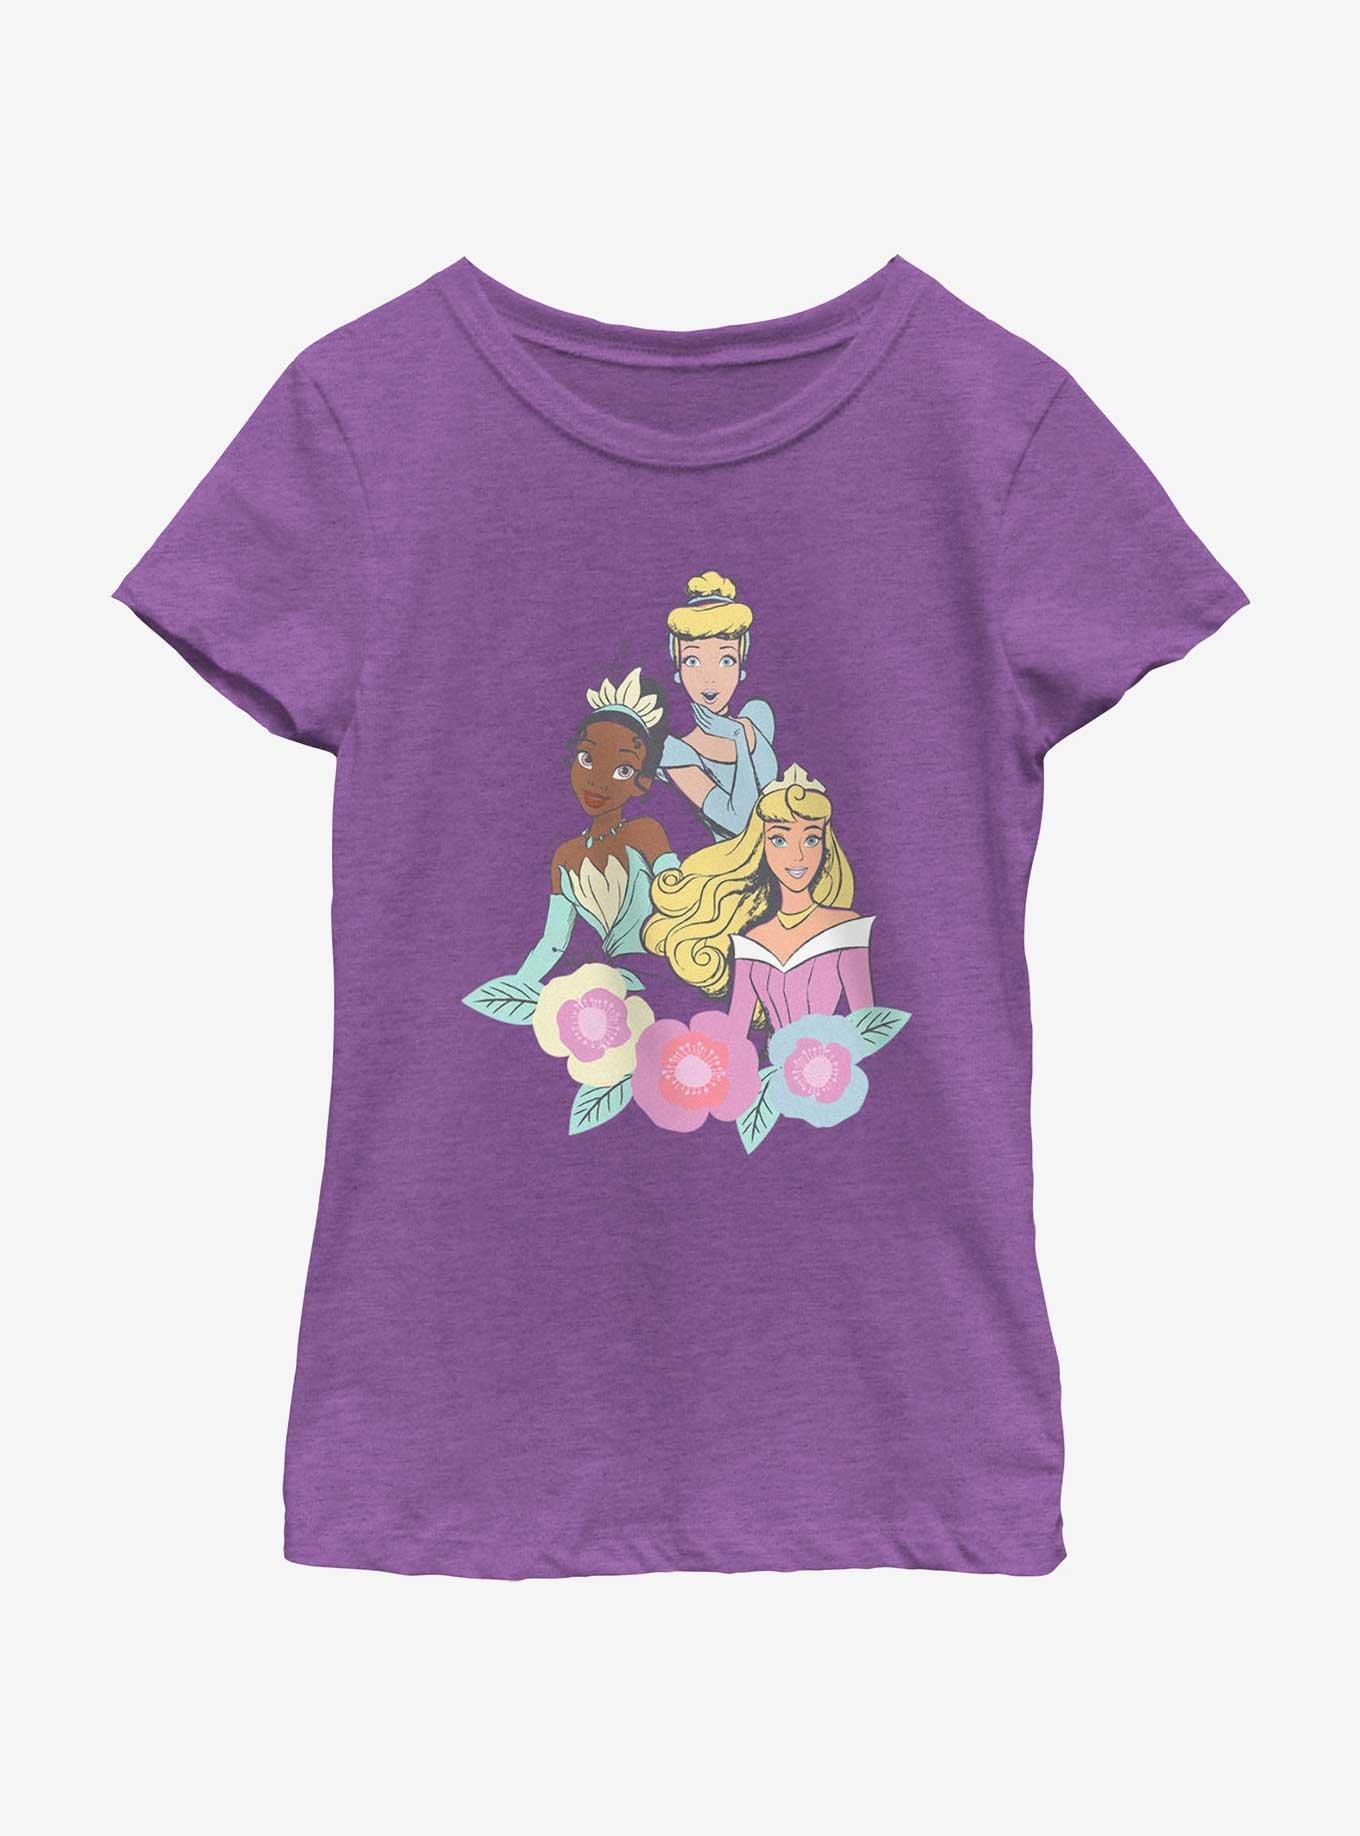 Disney Sleeping Beauty Tiana and Cinderella Group Pic Youth Girls T-Shirt, PURPLE BERRY, hi-res